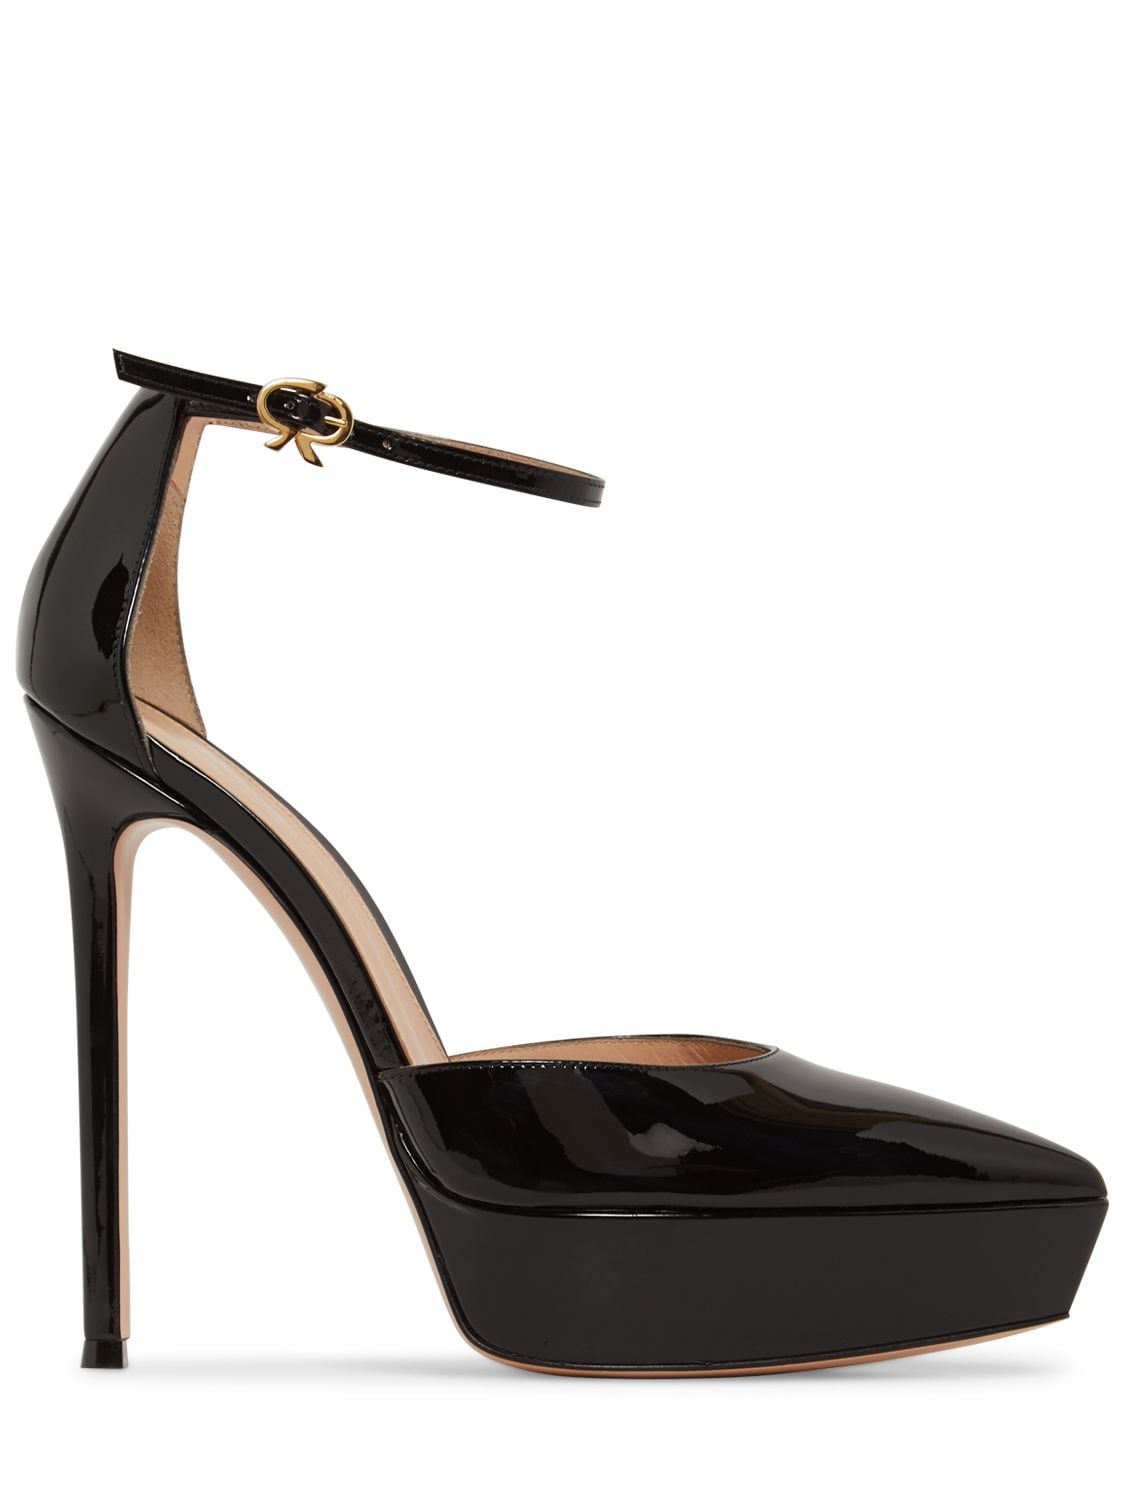 Image of 105mm Kasia Patent Leather Pumps